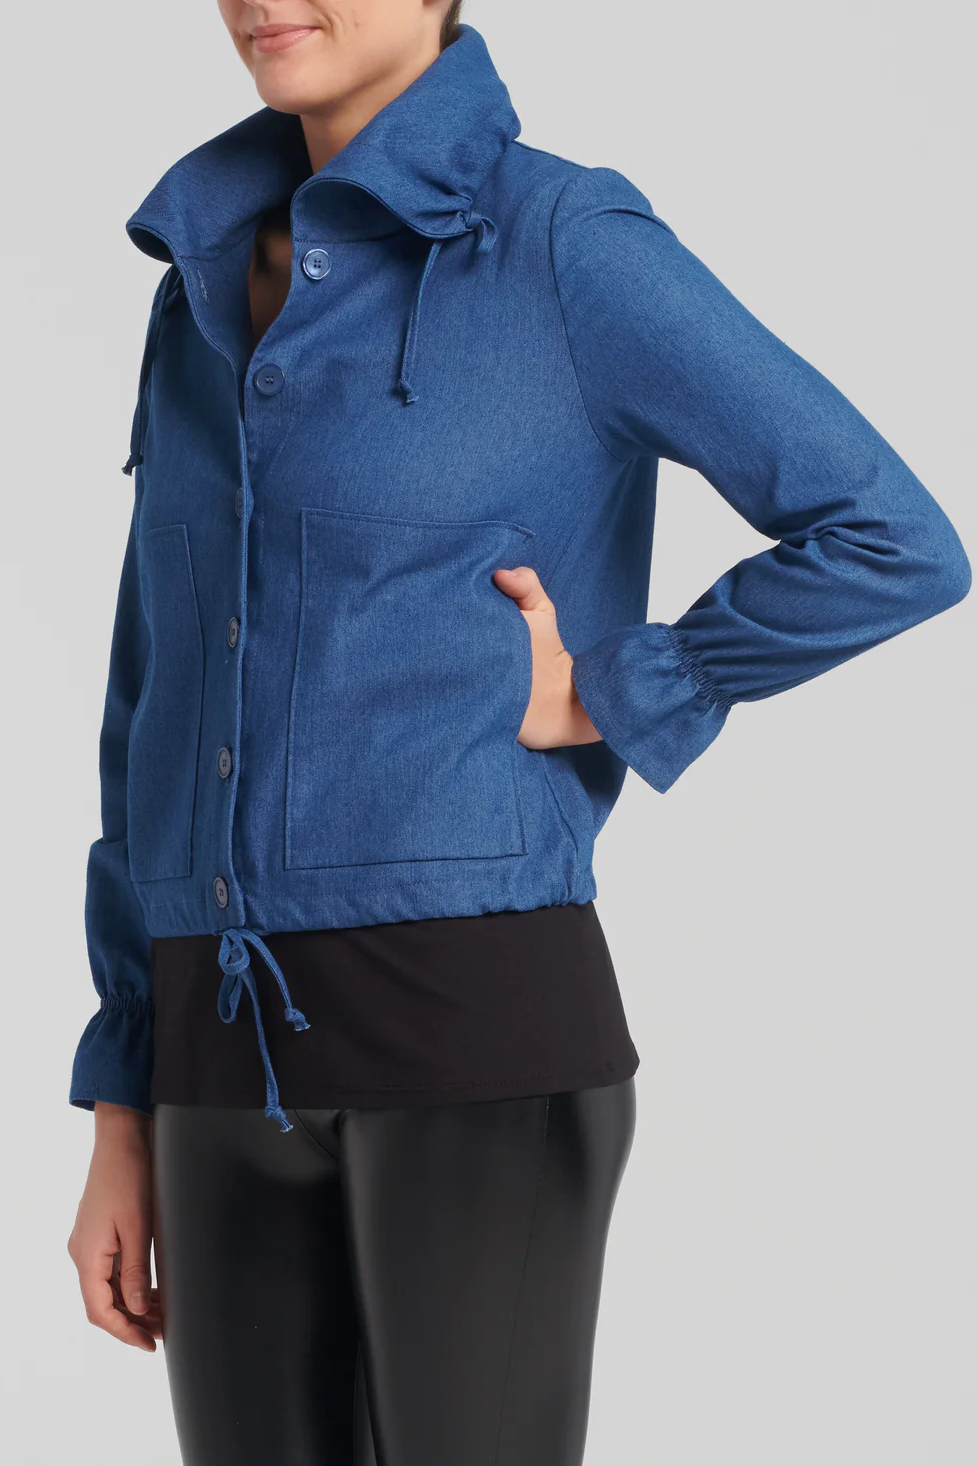 Eudora Jacket by Kollontai, Blue, side view, large collar with draw strings, drawstring at the hem, front buttons, large patch pockets, puff detail at the cuffs, sizes XS to XXL, made in Montreal 